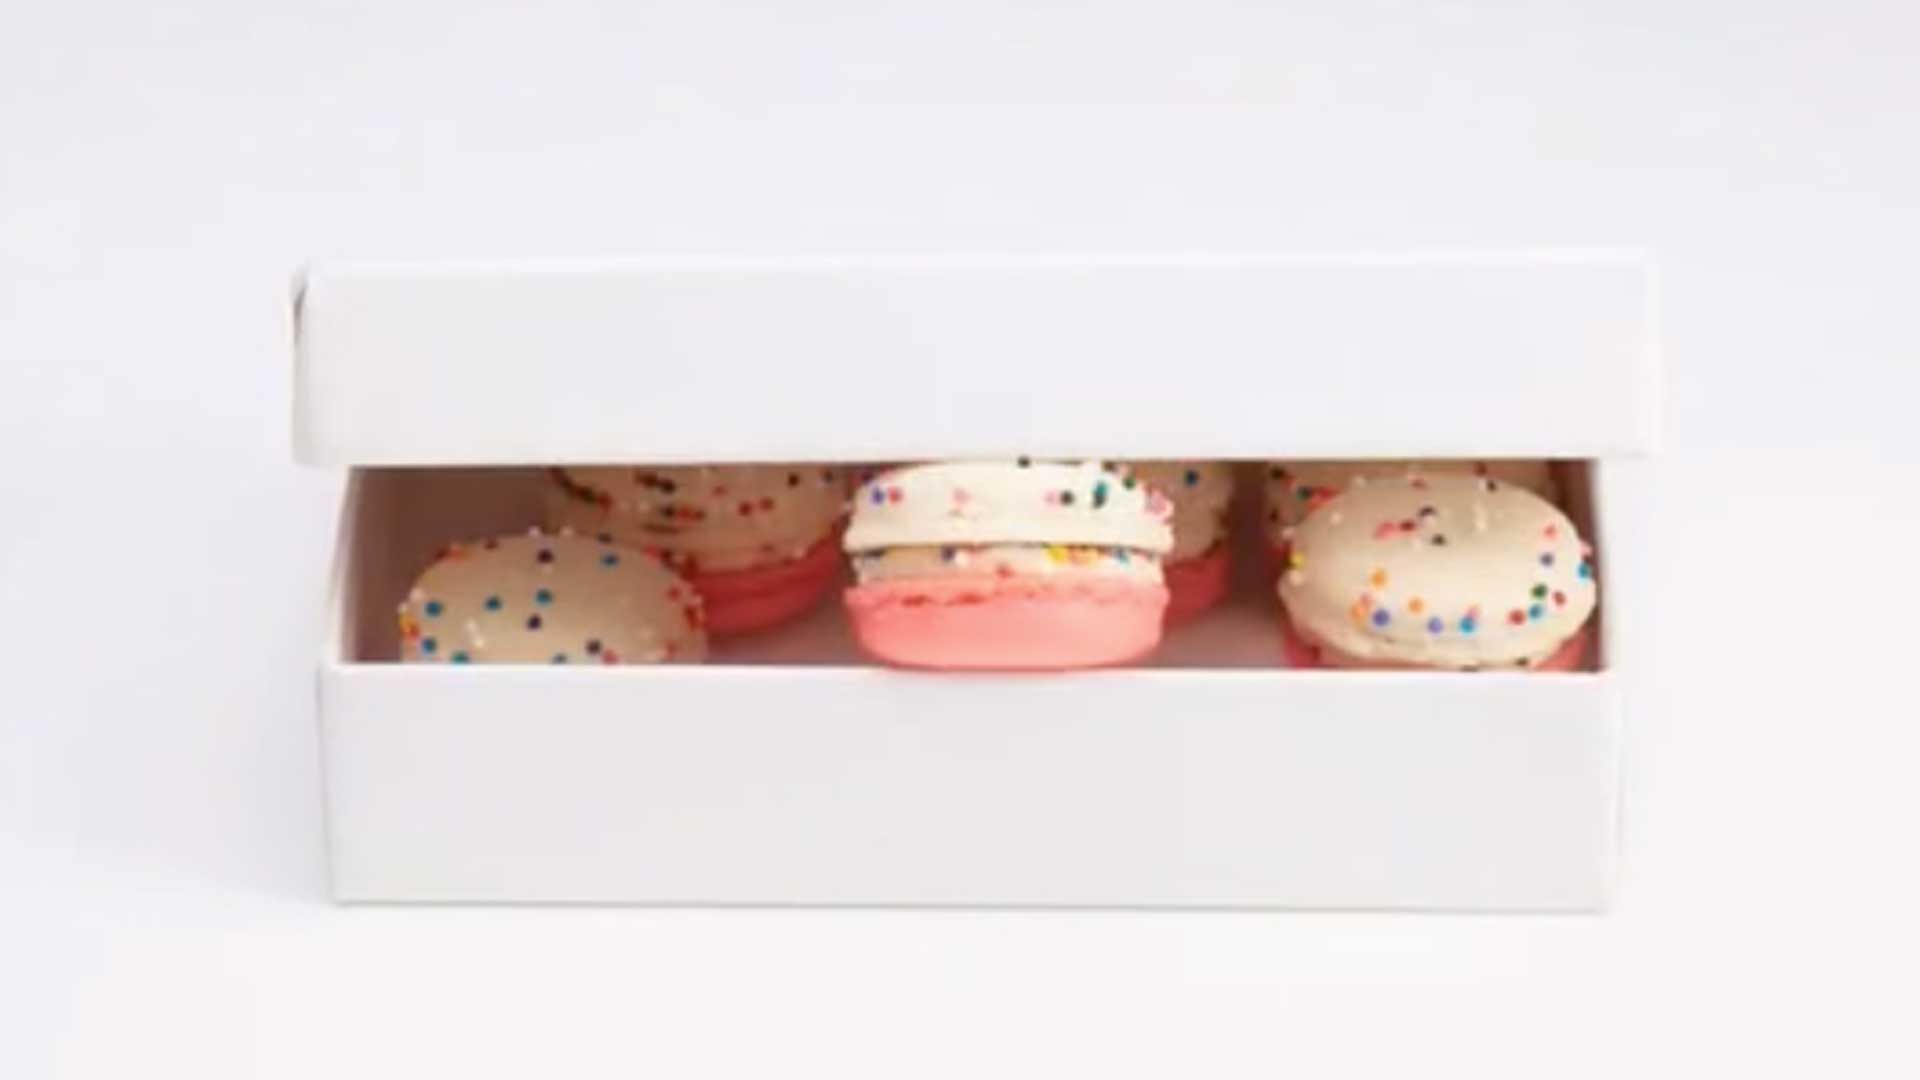 Commercial studio product photography and video production in Westchester, New York for stop motion video of macarons